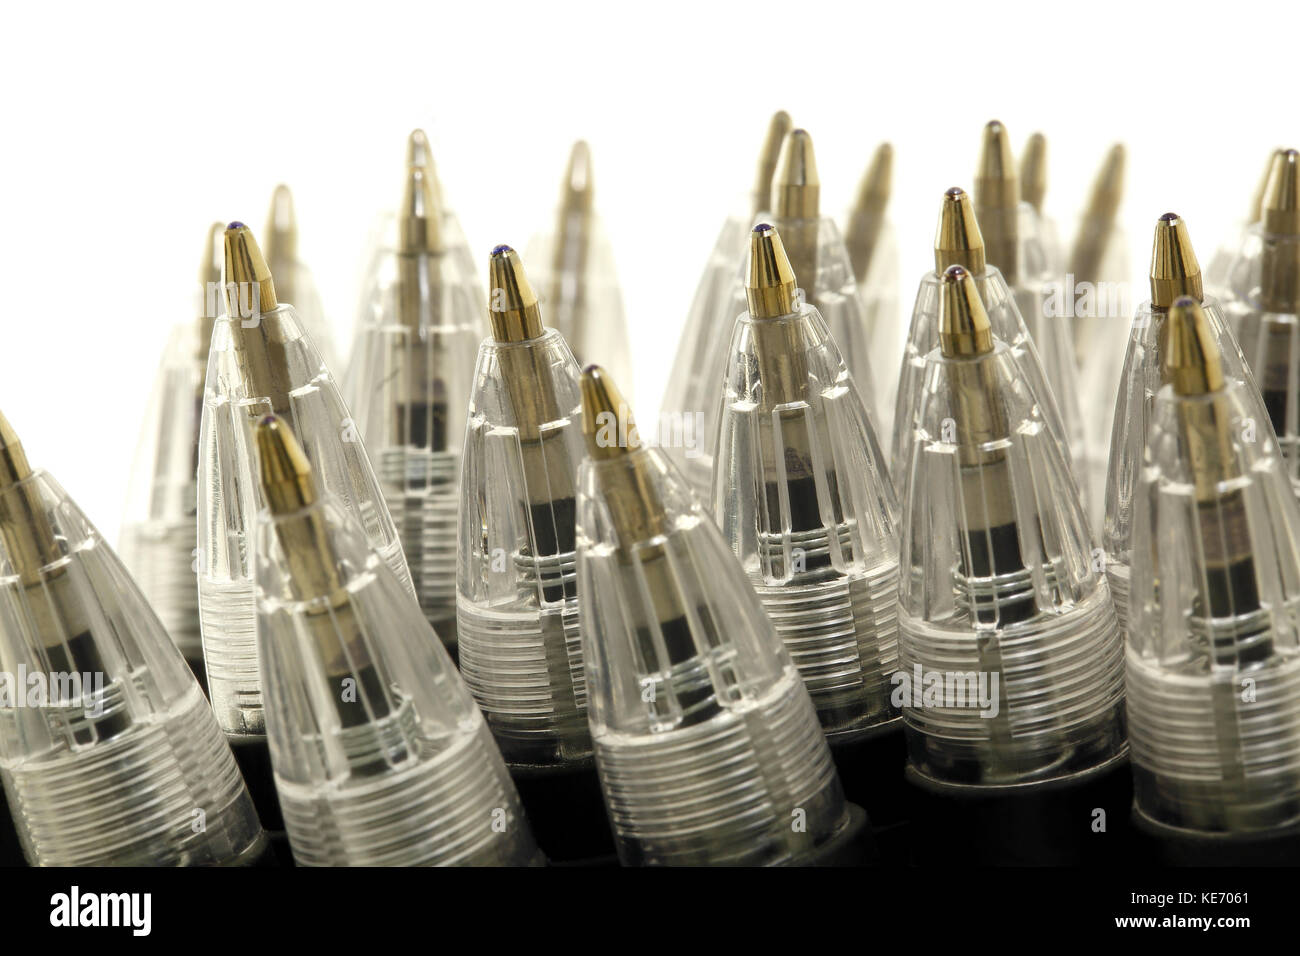 Close up image of ball point pens Stock Photo